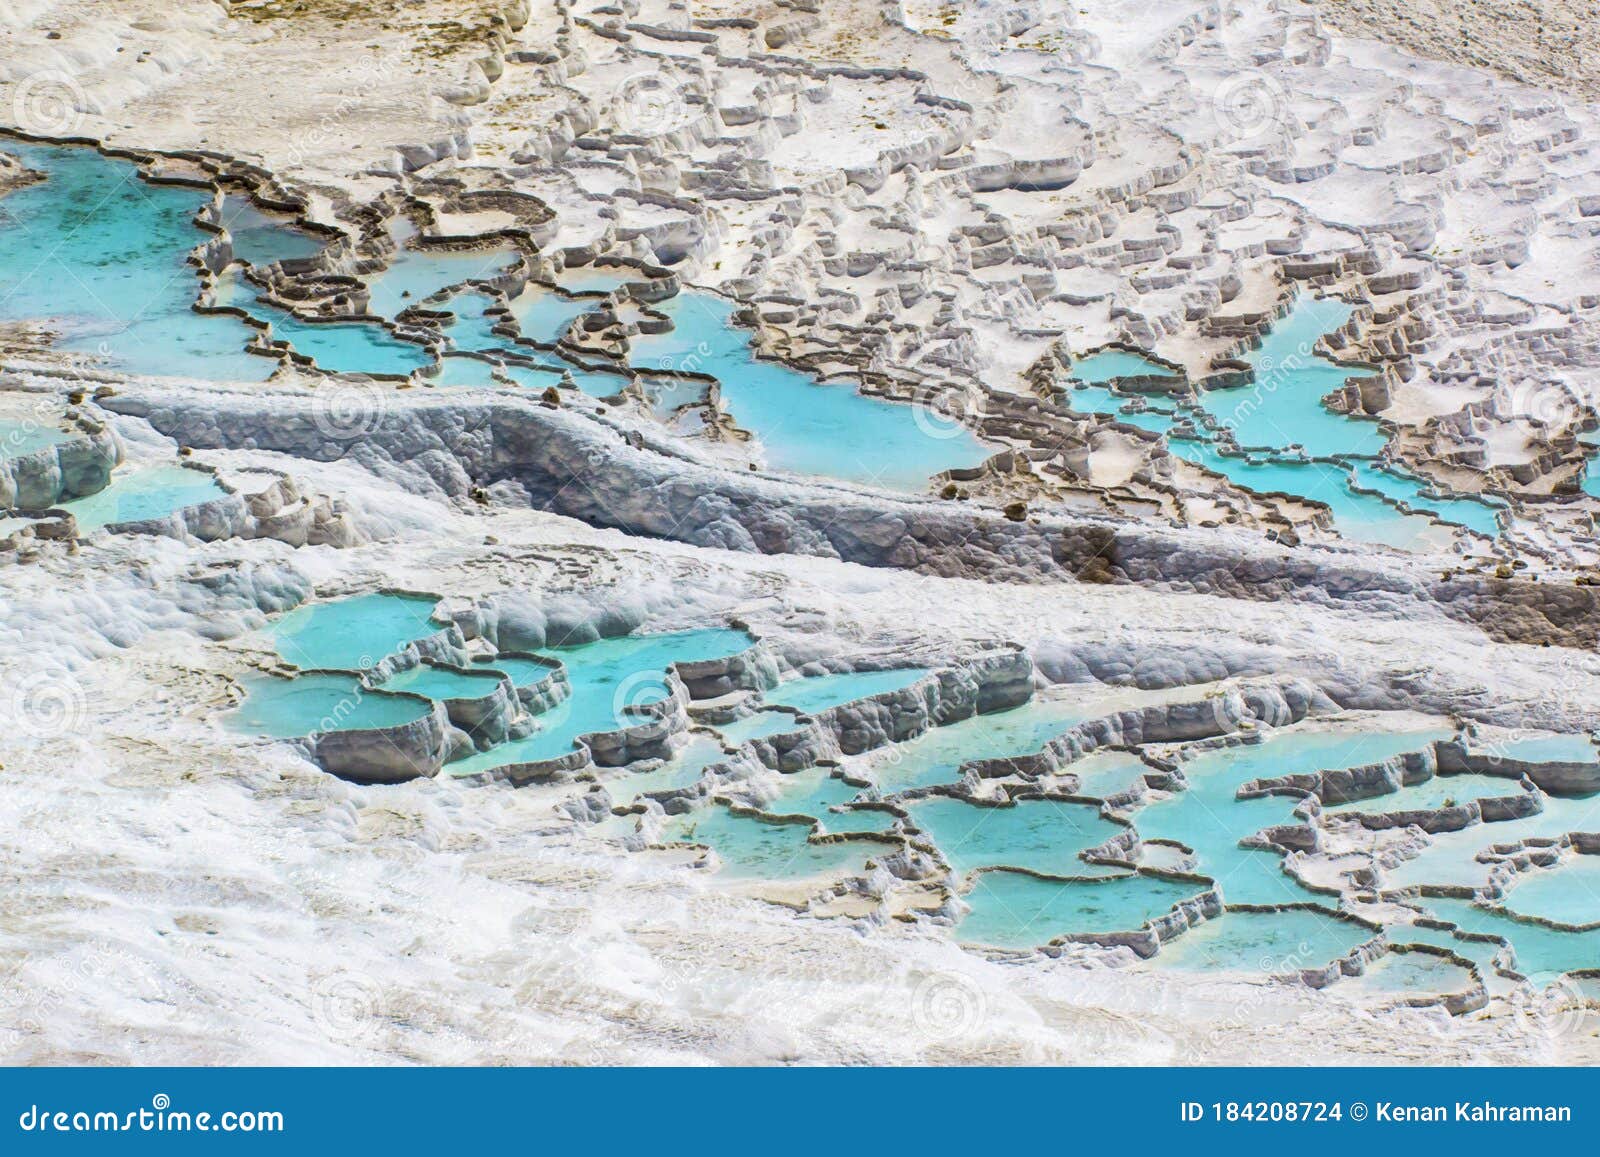 Pamukkale Cotton Castle Turkey Water is Turquoise Color on the White ...